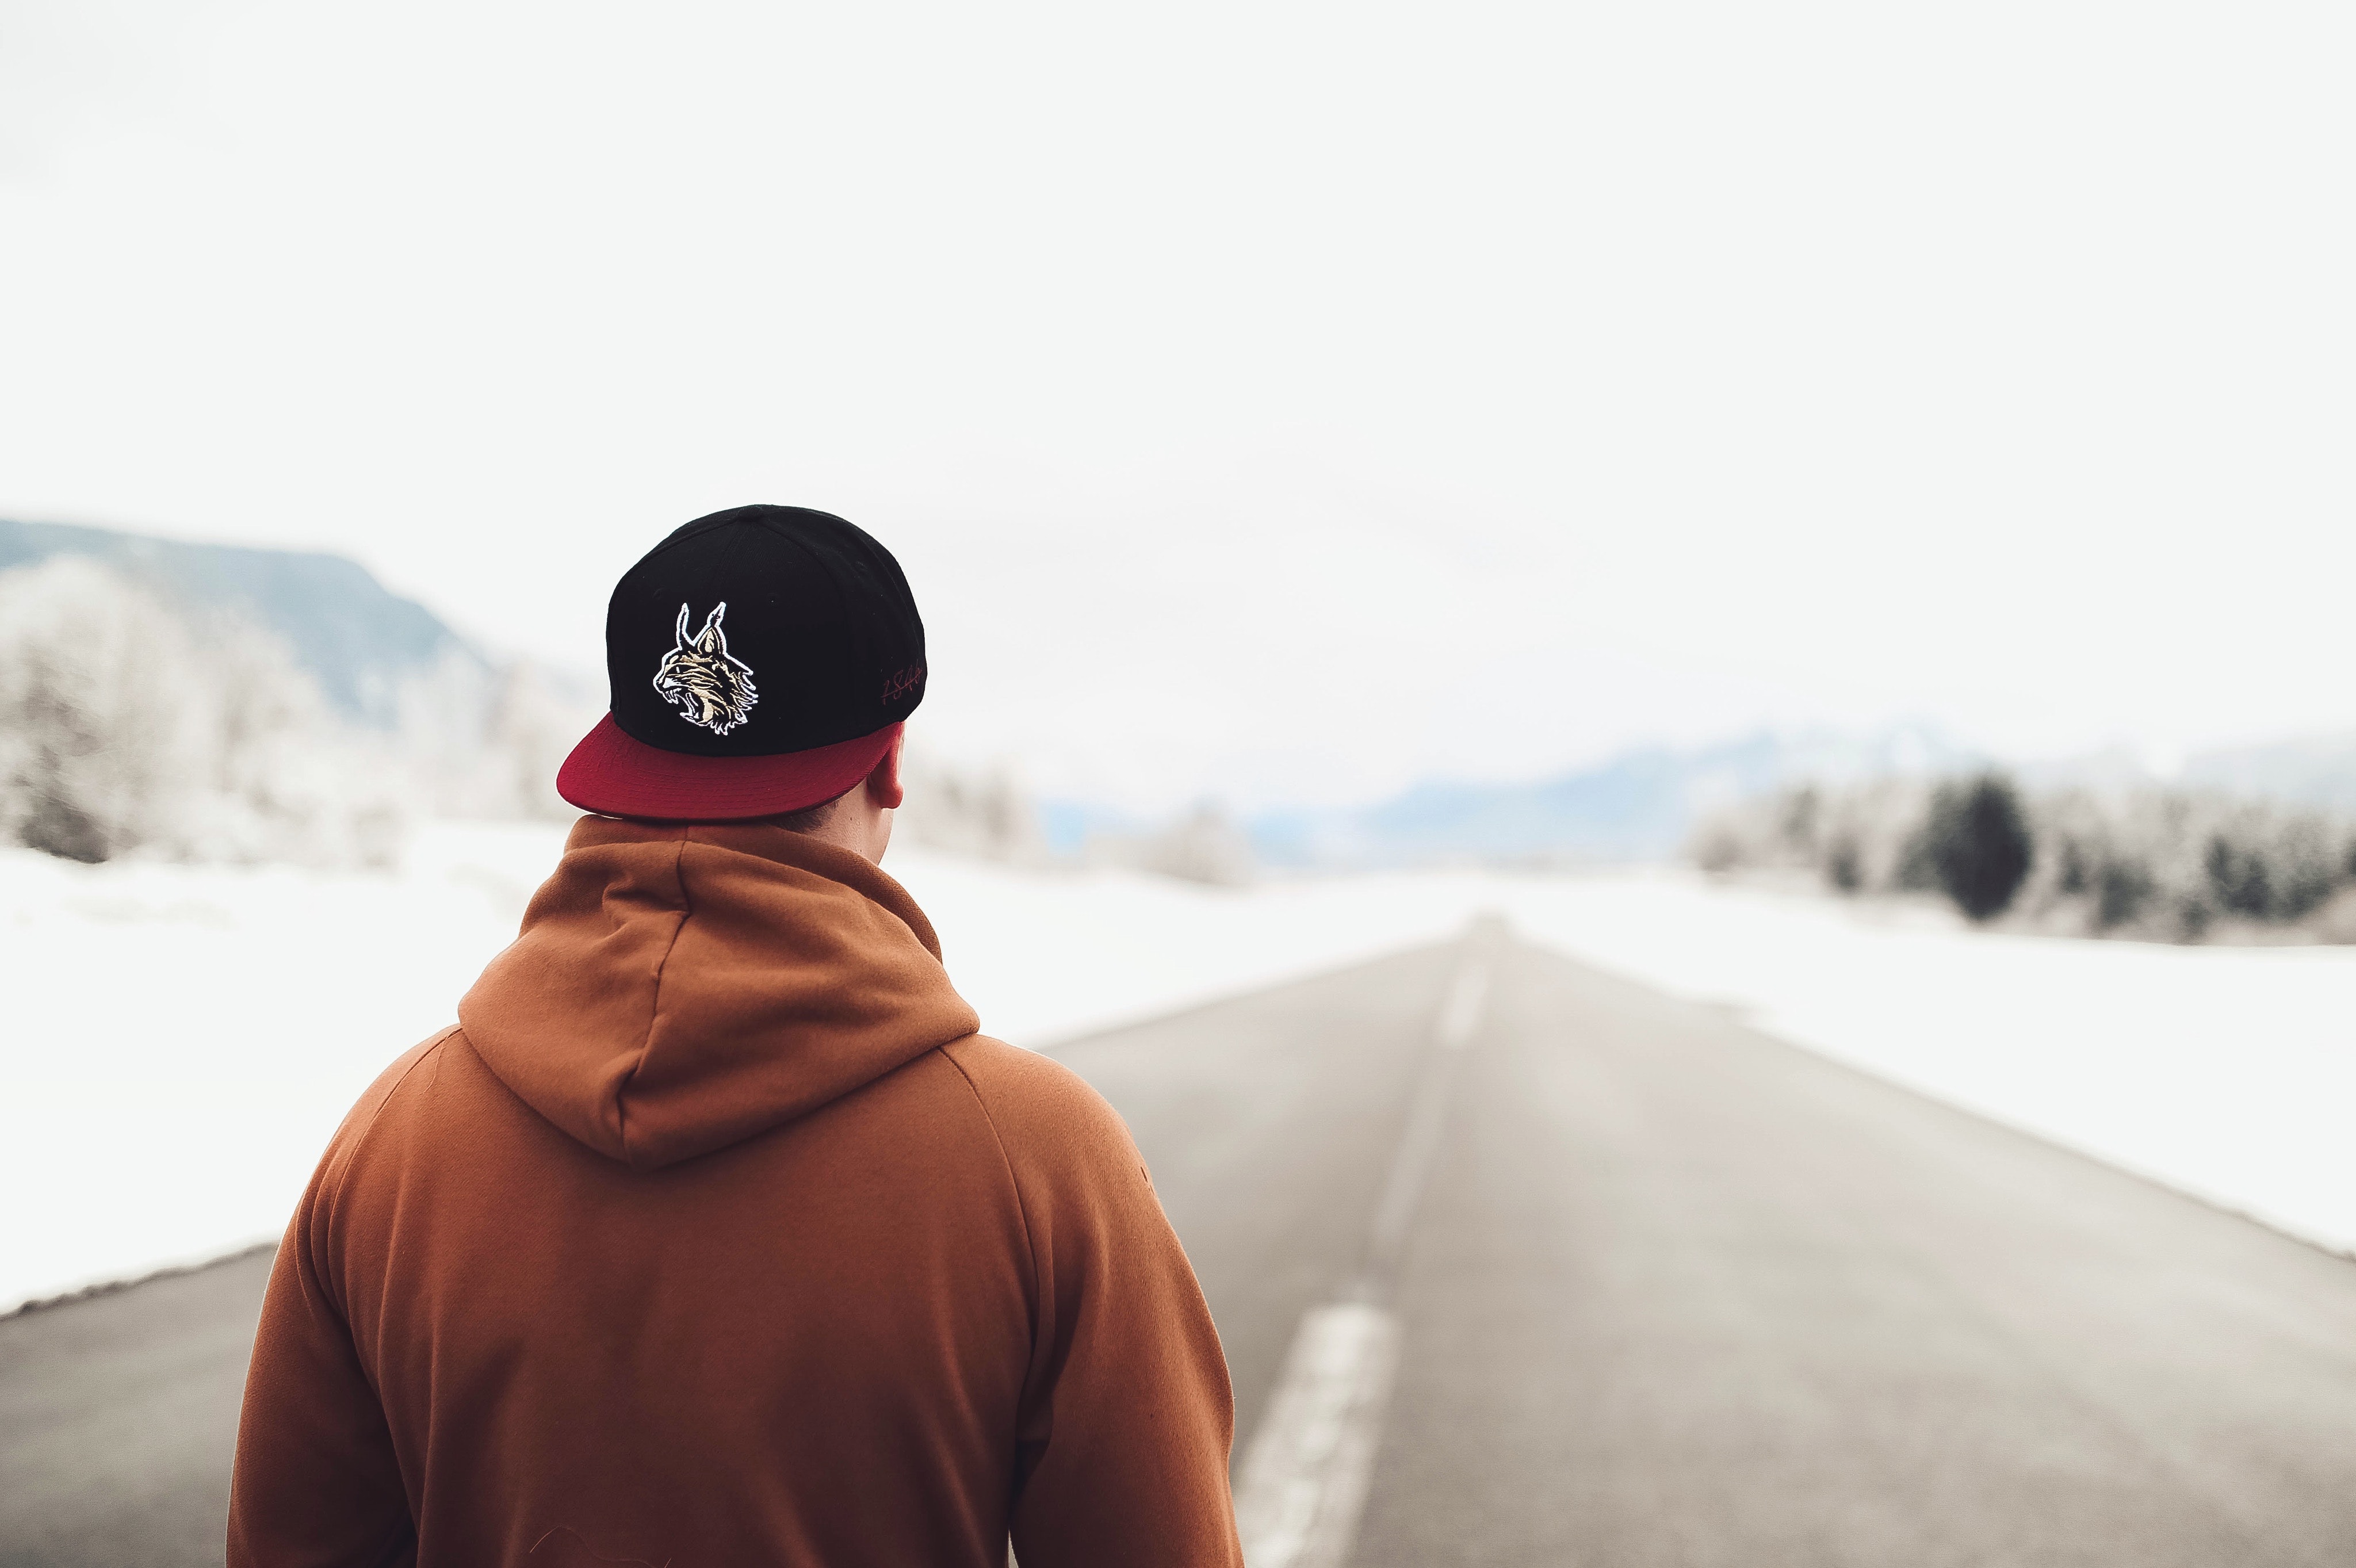 Person in brown hoodie and fitted cap walking on road photo